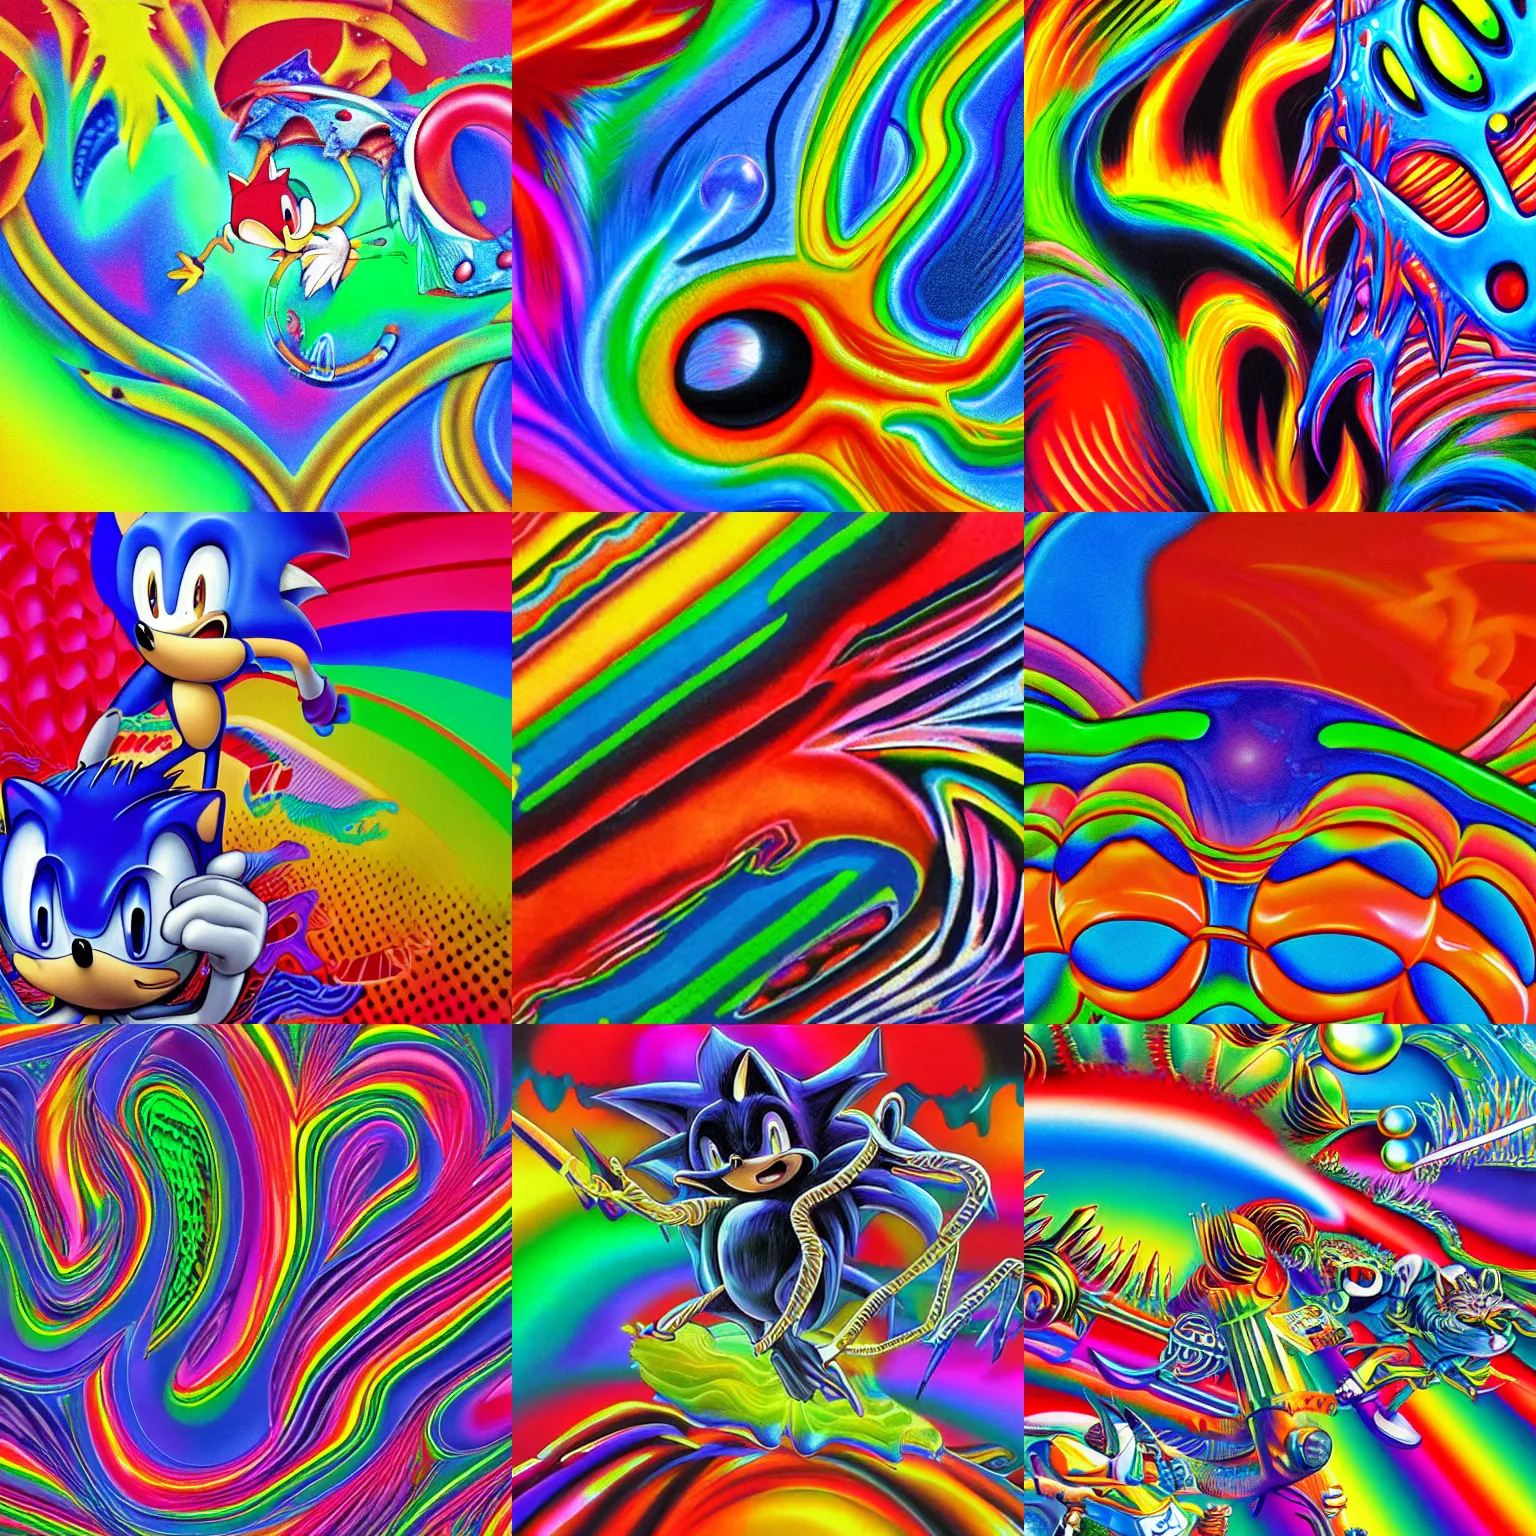 Prompt: closeup of a surreal, sharp, detailed professional, high quality airbrush art mgmt album cover of a liquid dissolving airbrush art lsd dmt sonic the hedgehog floating through cyberspace, rainbow checkerboard background, 1 9 9 0 s 1 9 9 2 sega genesis airbrush art video game album cover